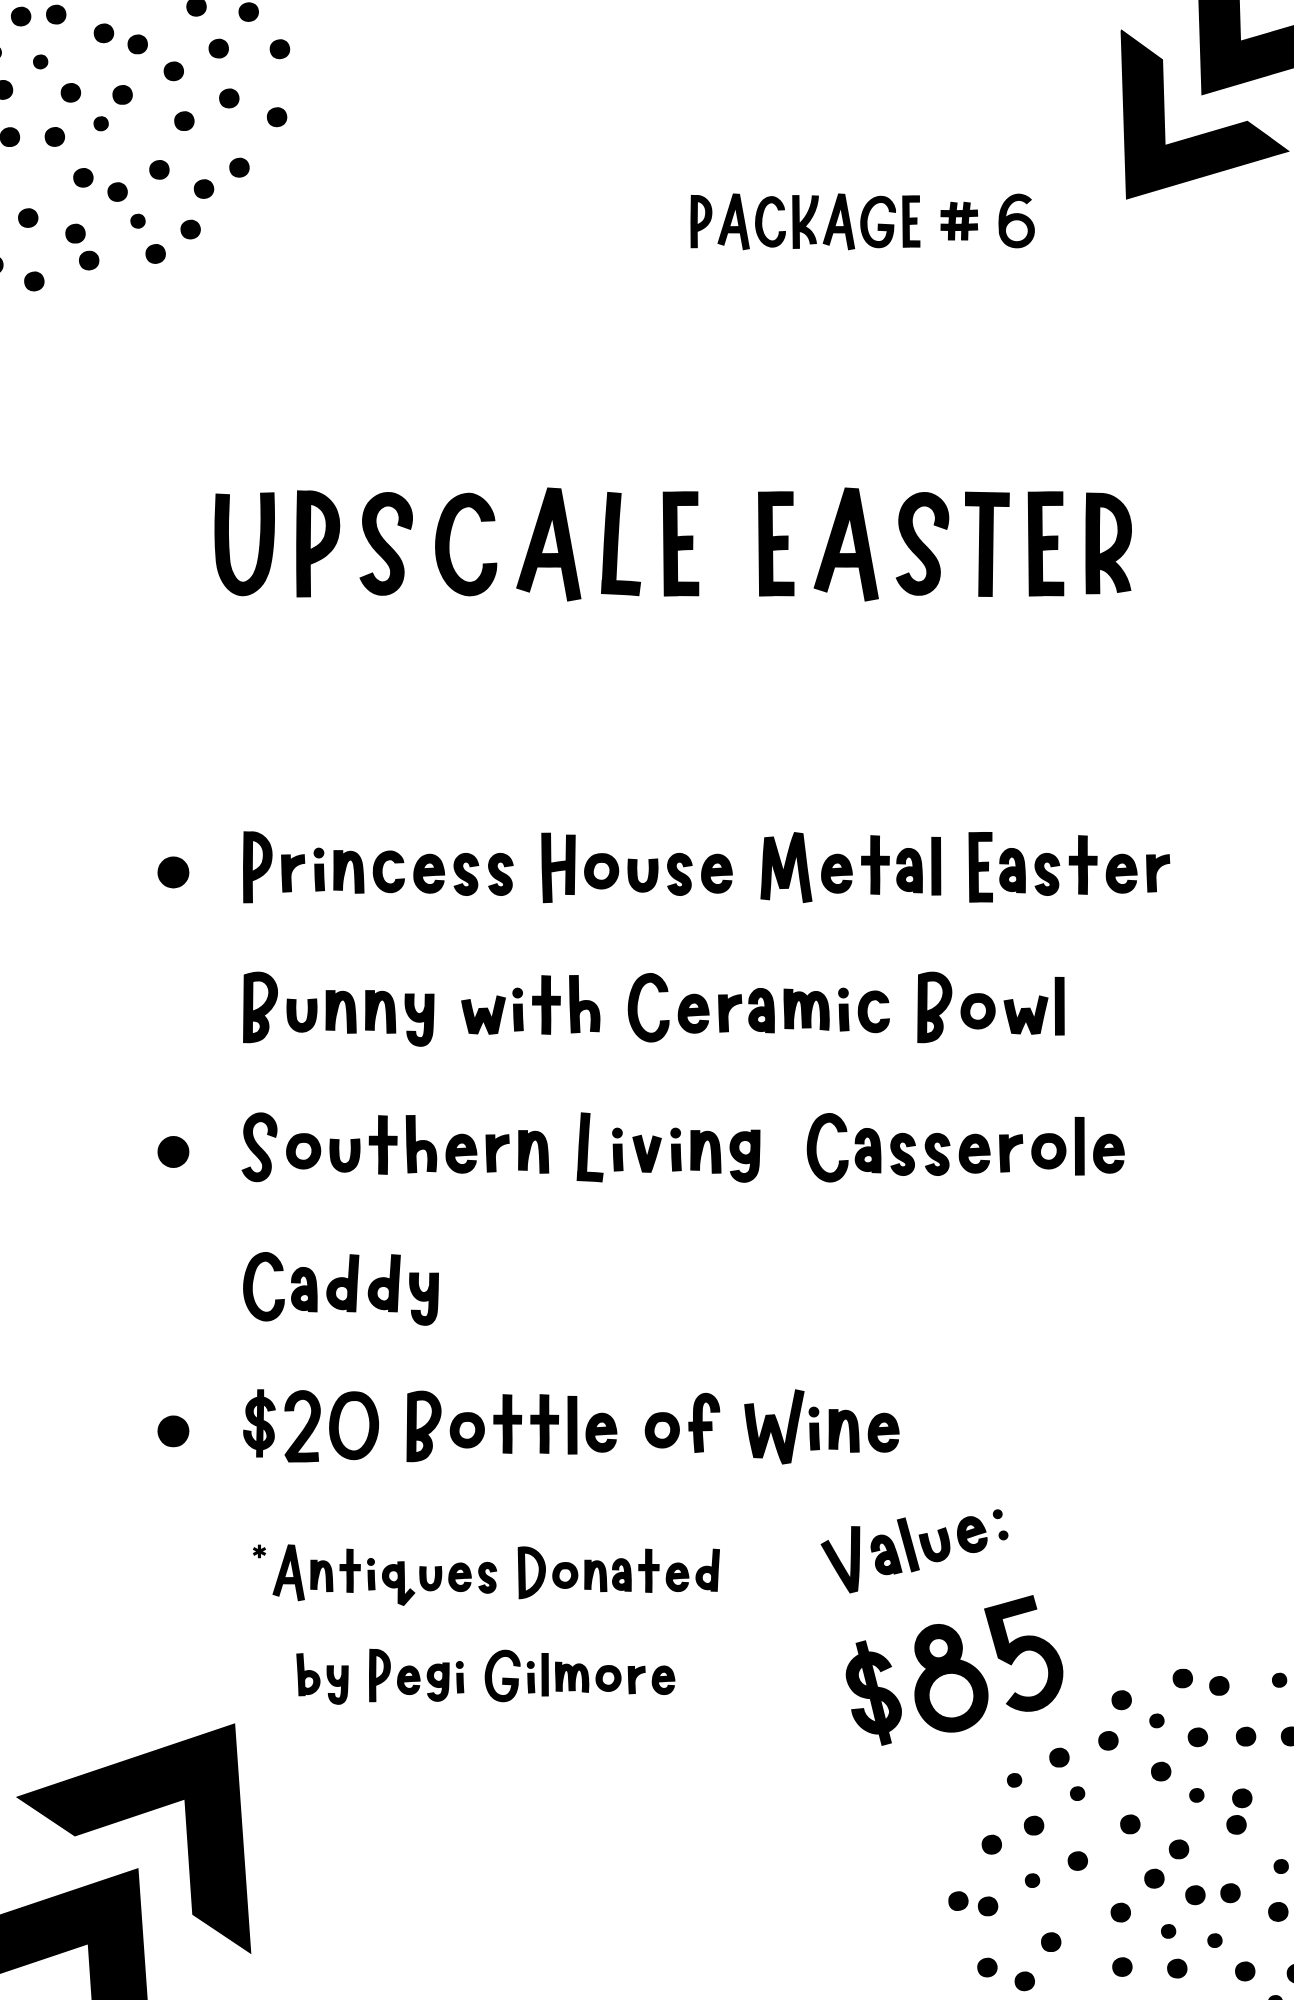 Auction Item #6: Upscale Easter